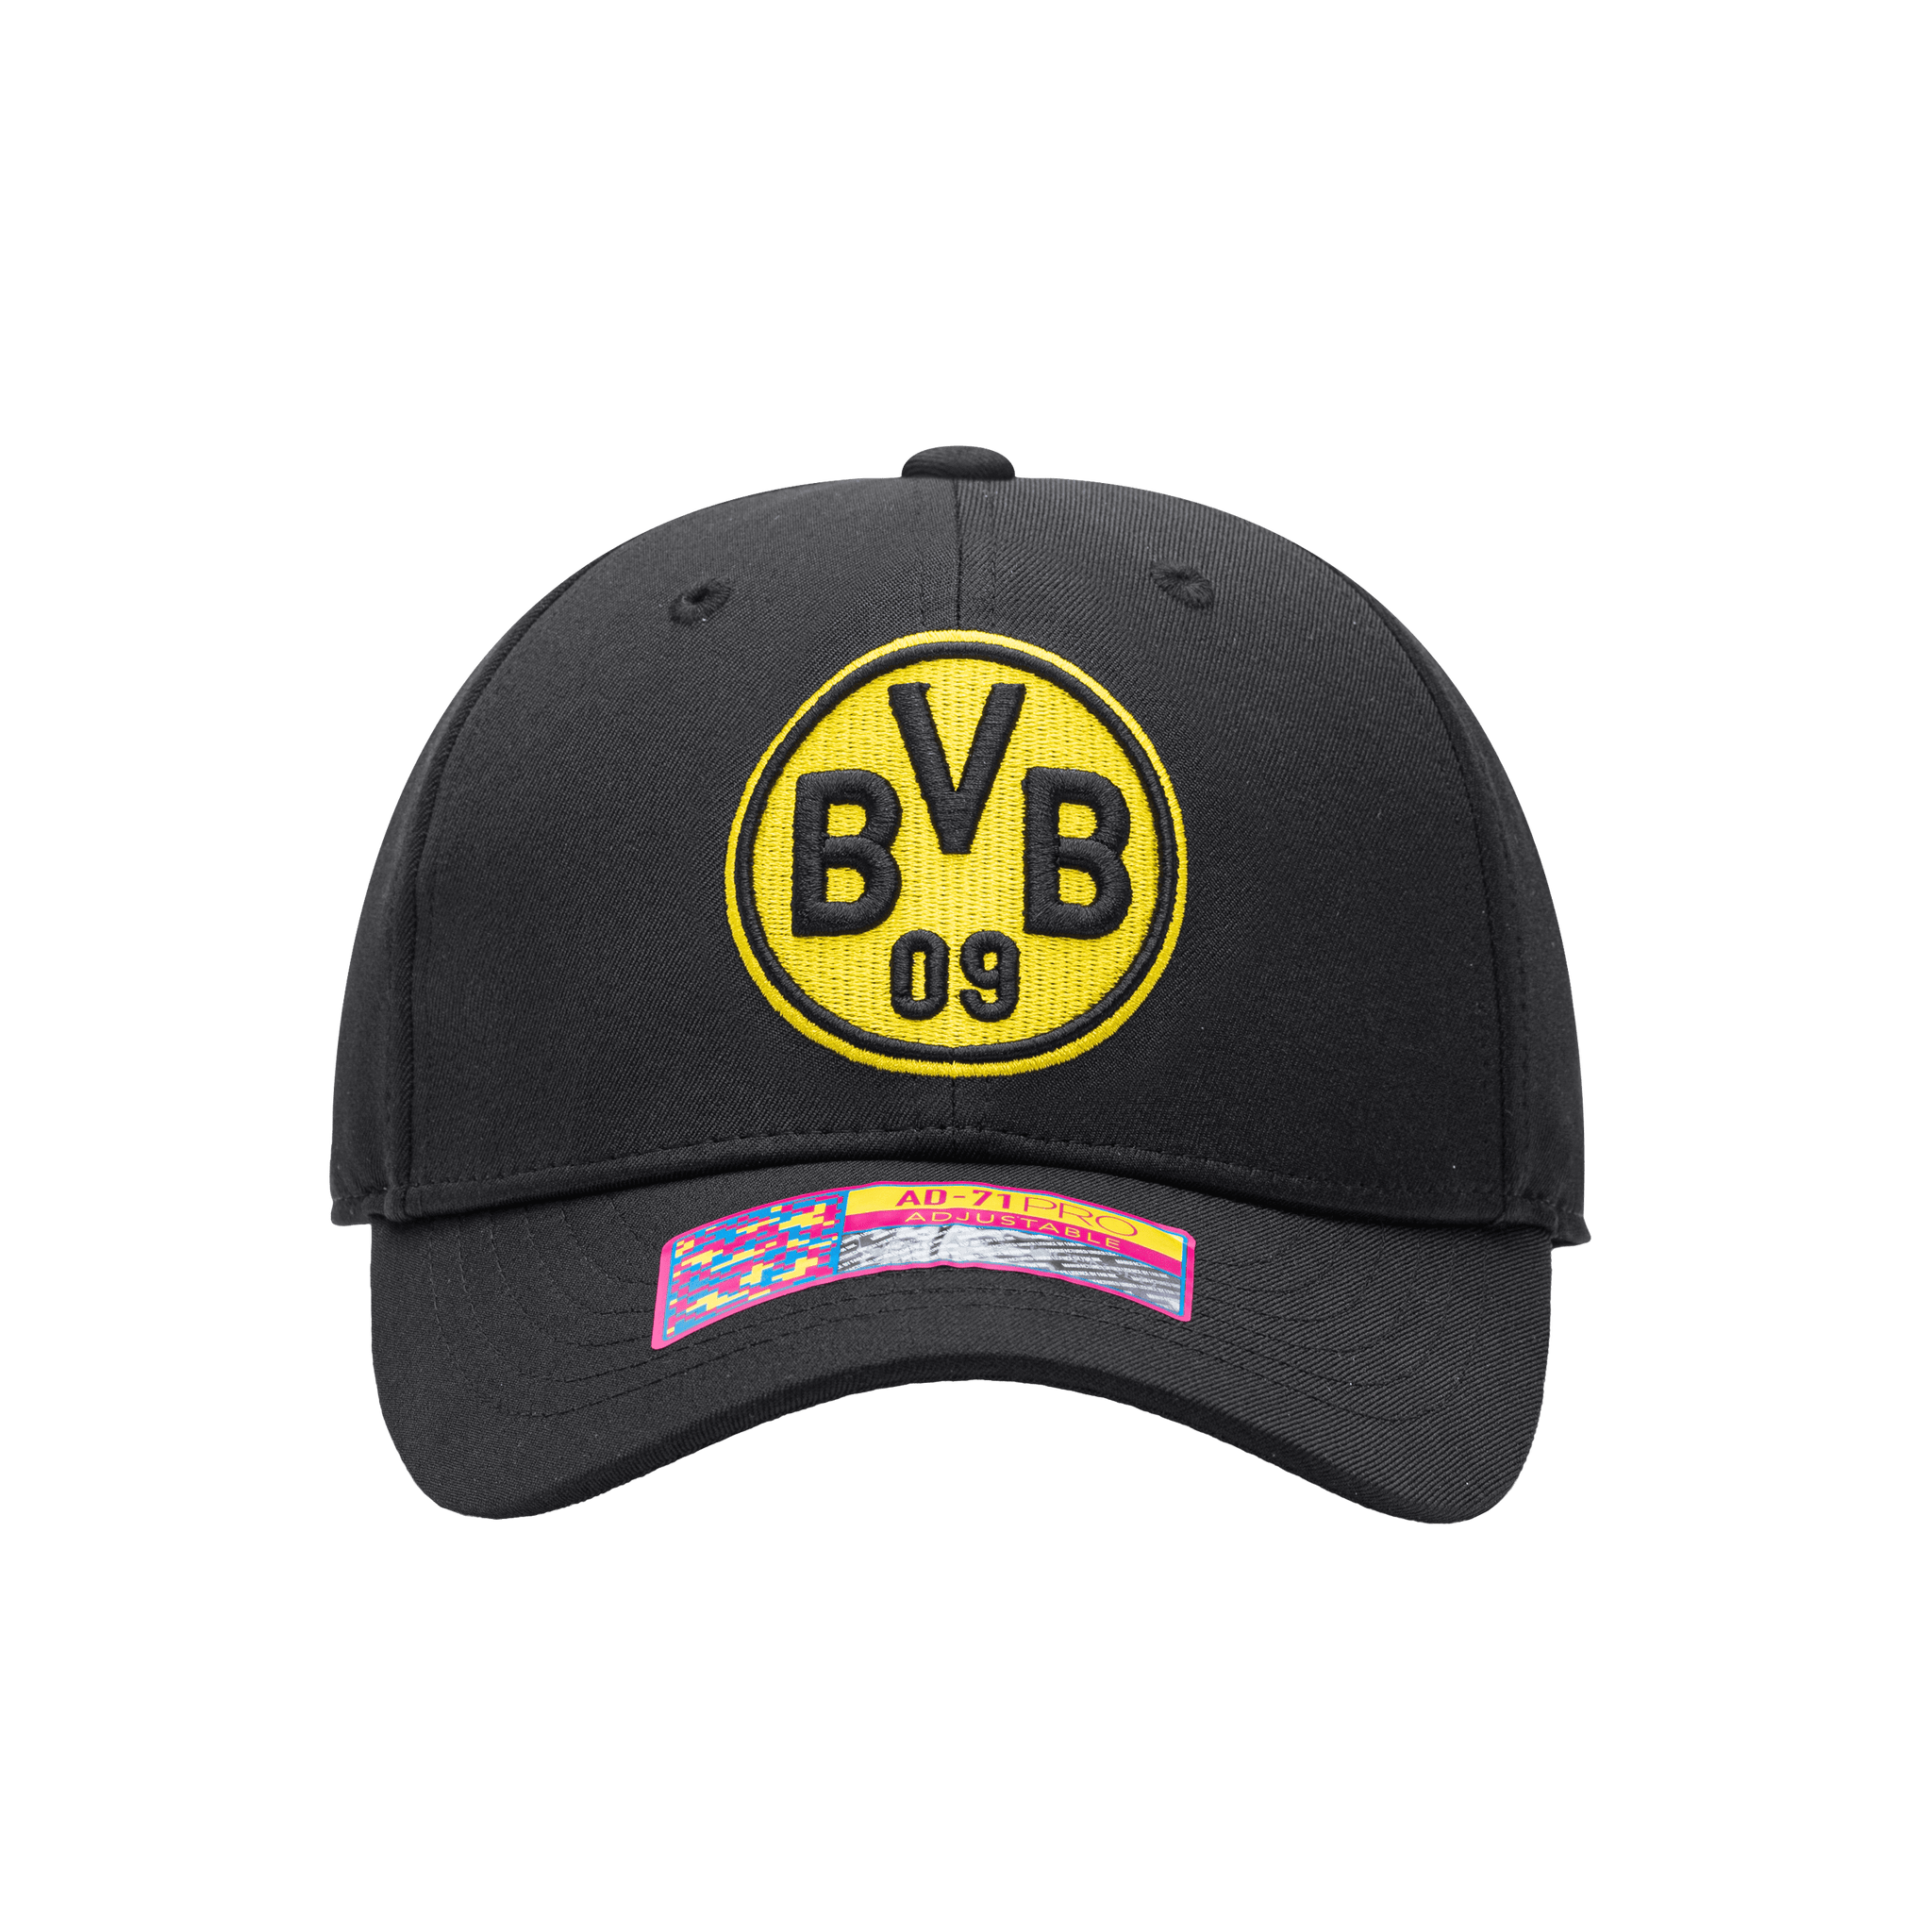 Front view of the Borussia Dortmund Standard Adjustable hat with mid constructured crown, curved peak brim, and slider buckle closure, in Black.